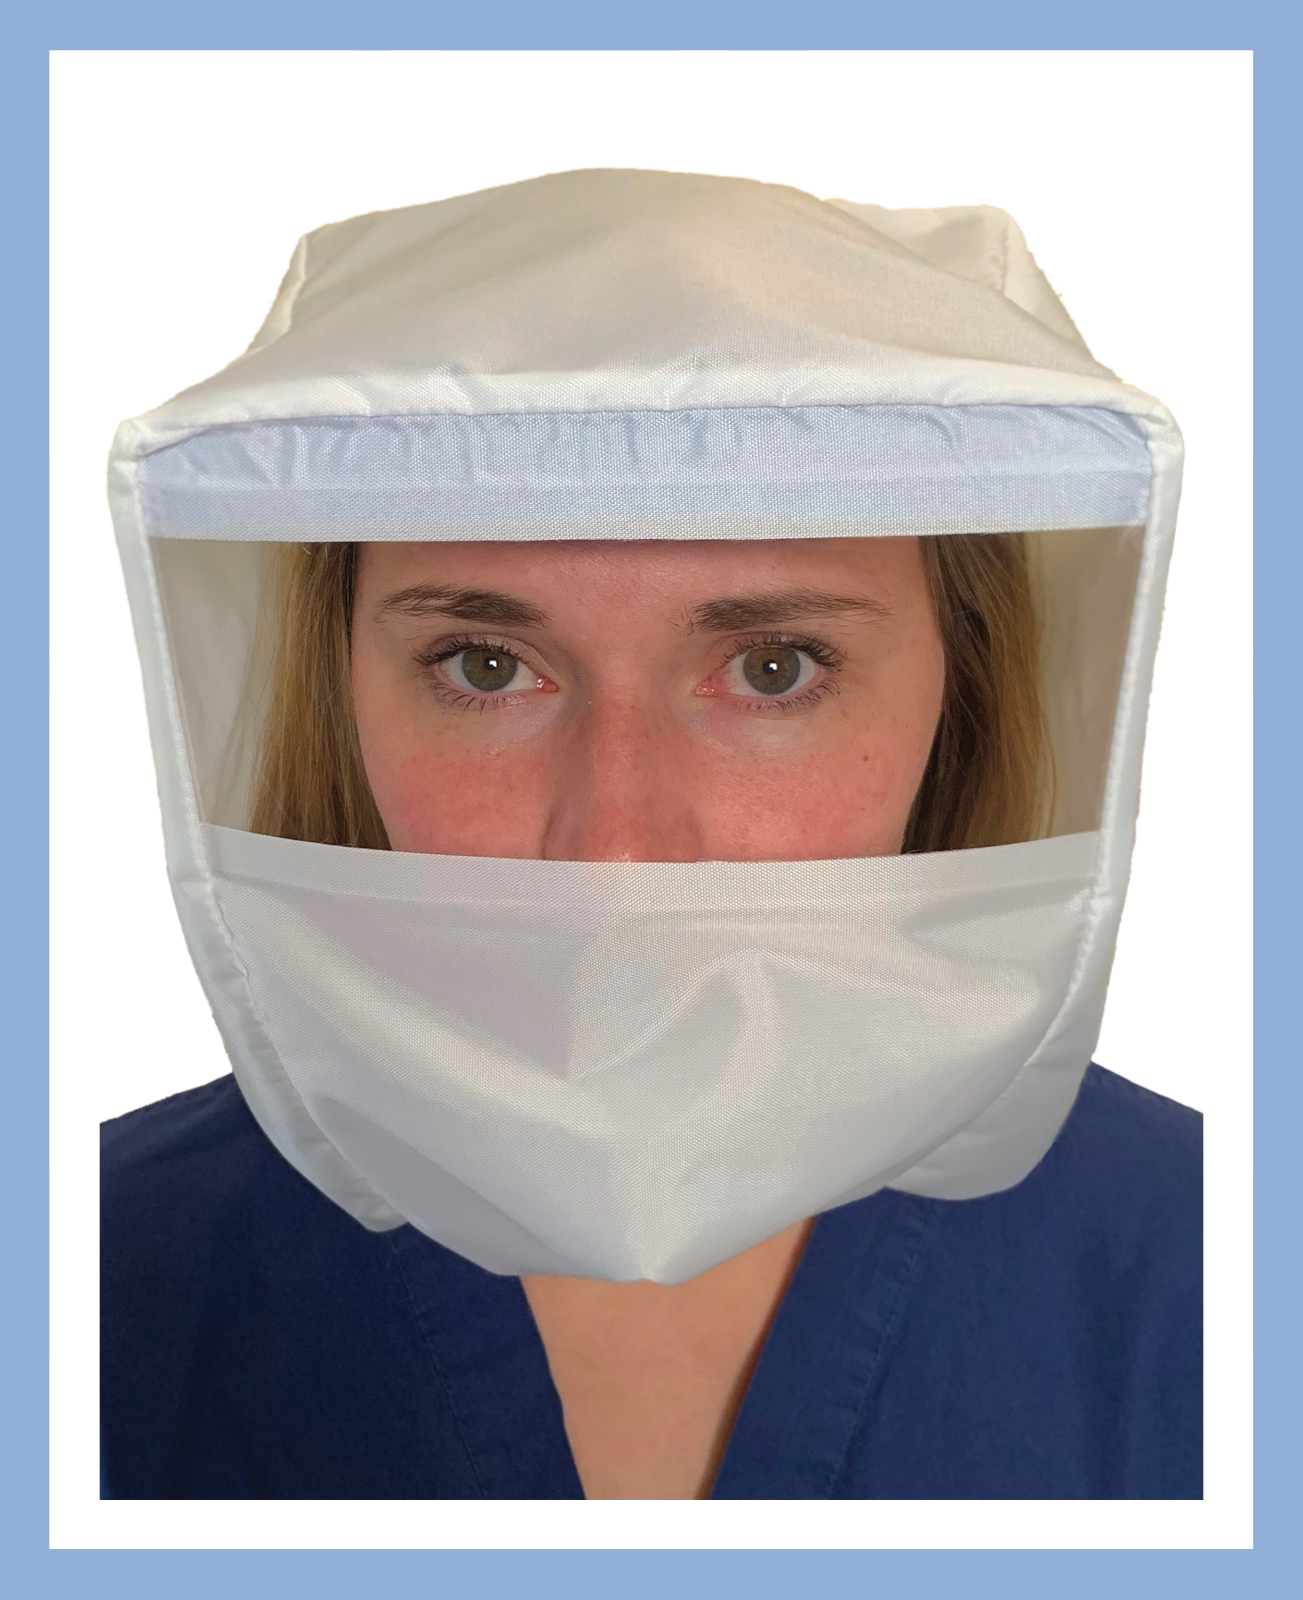 Full Face Shield Ppe Airport Airplane Safety Protection For Mucus Membranes Usa